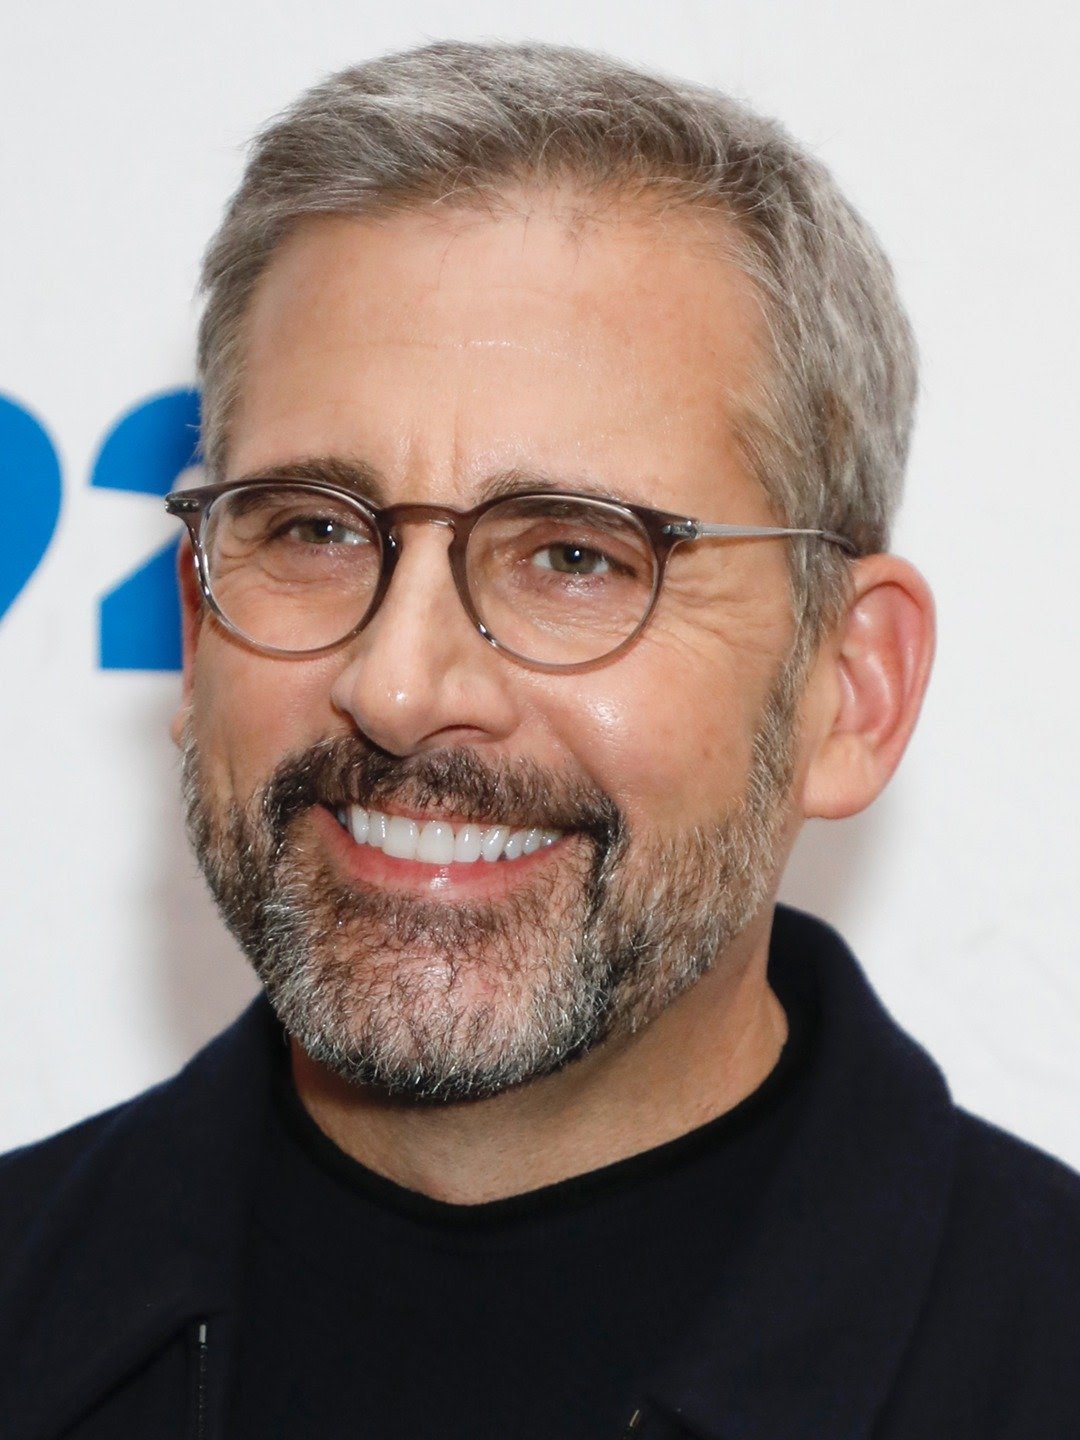 US actor Steve Carell poses during a photo call on his film 'Date